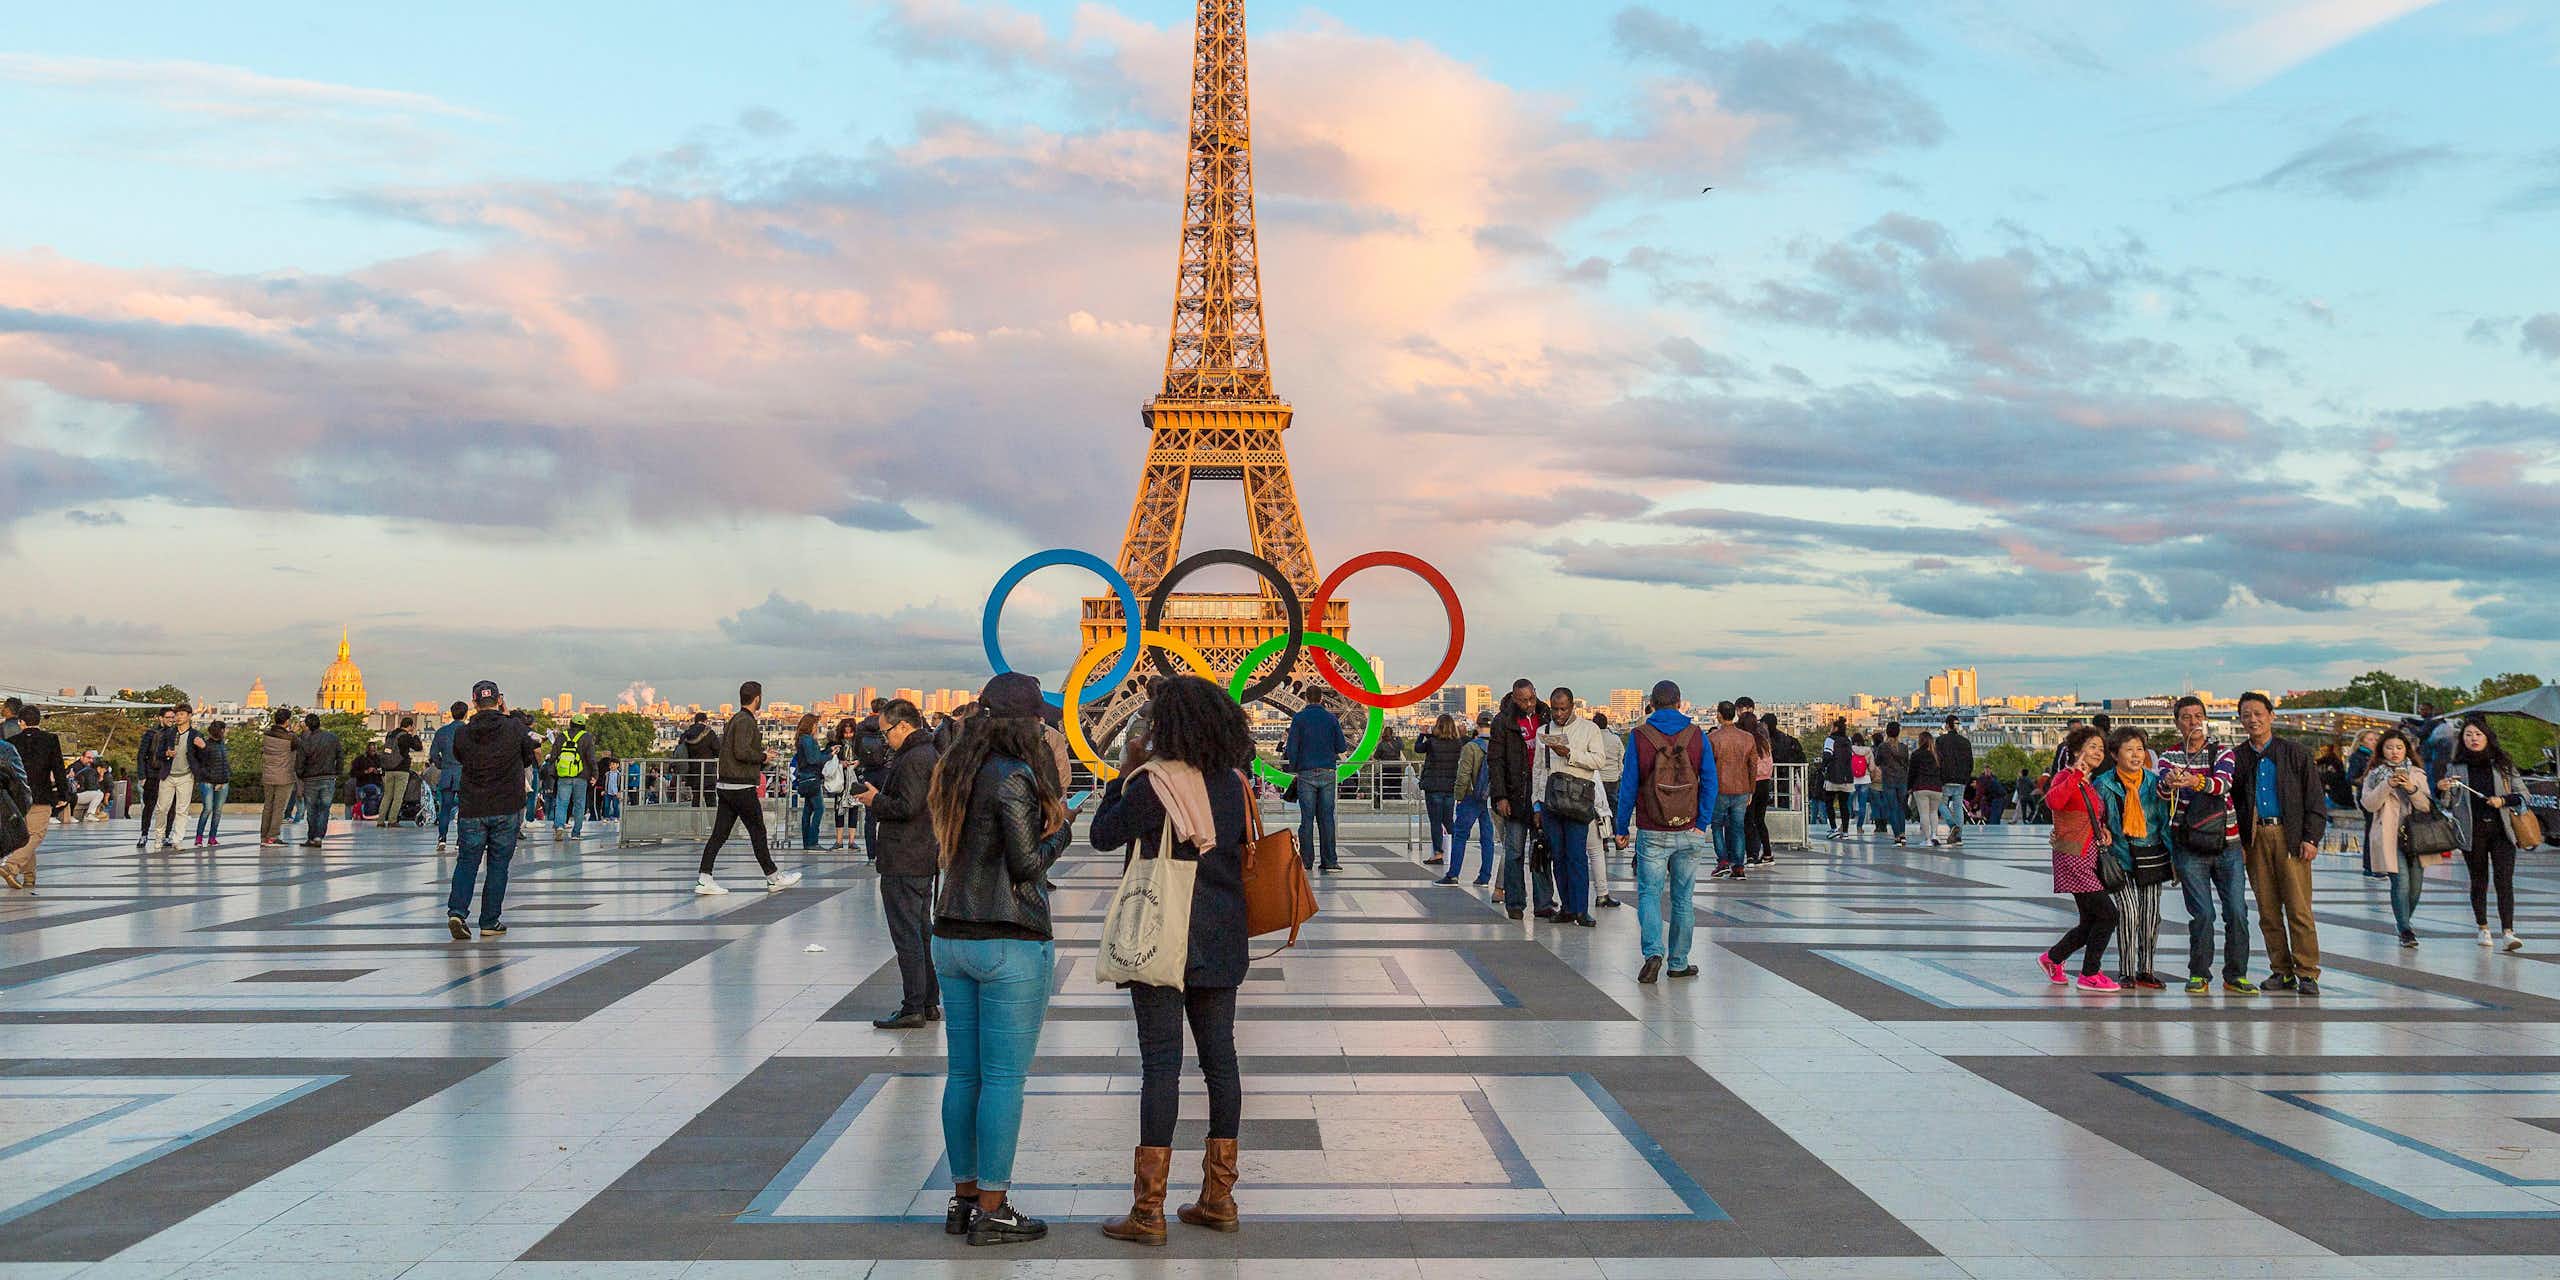 Eiffel Tower with Olympic rings in the foreground